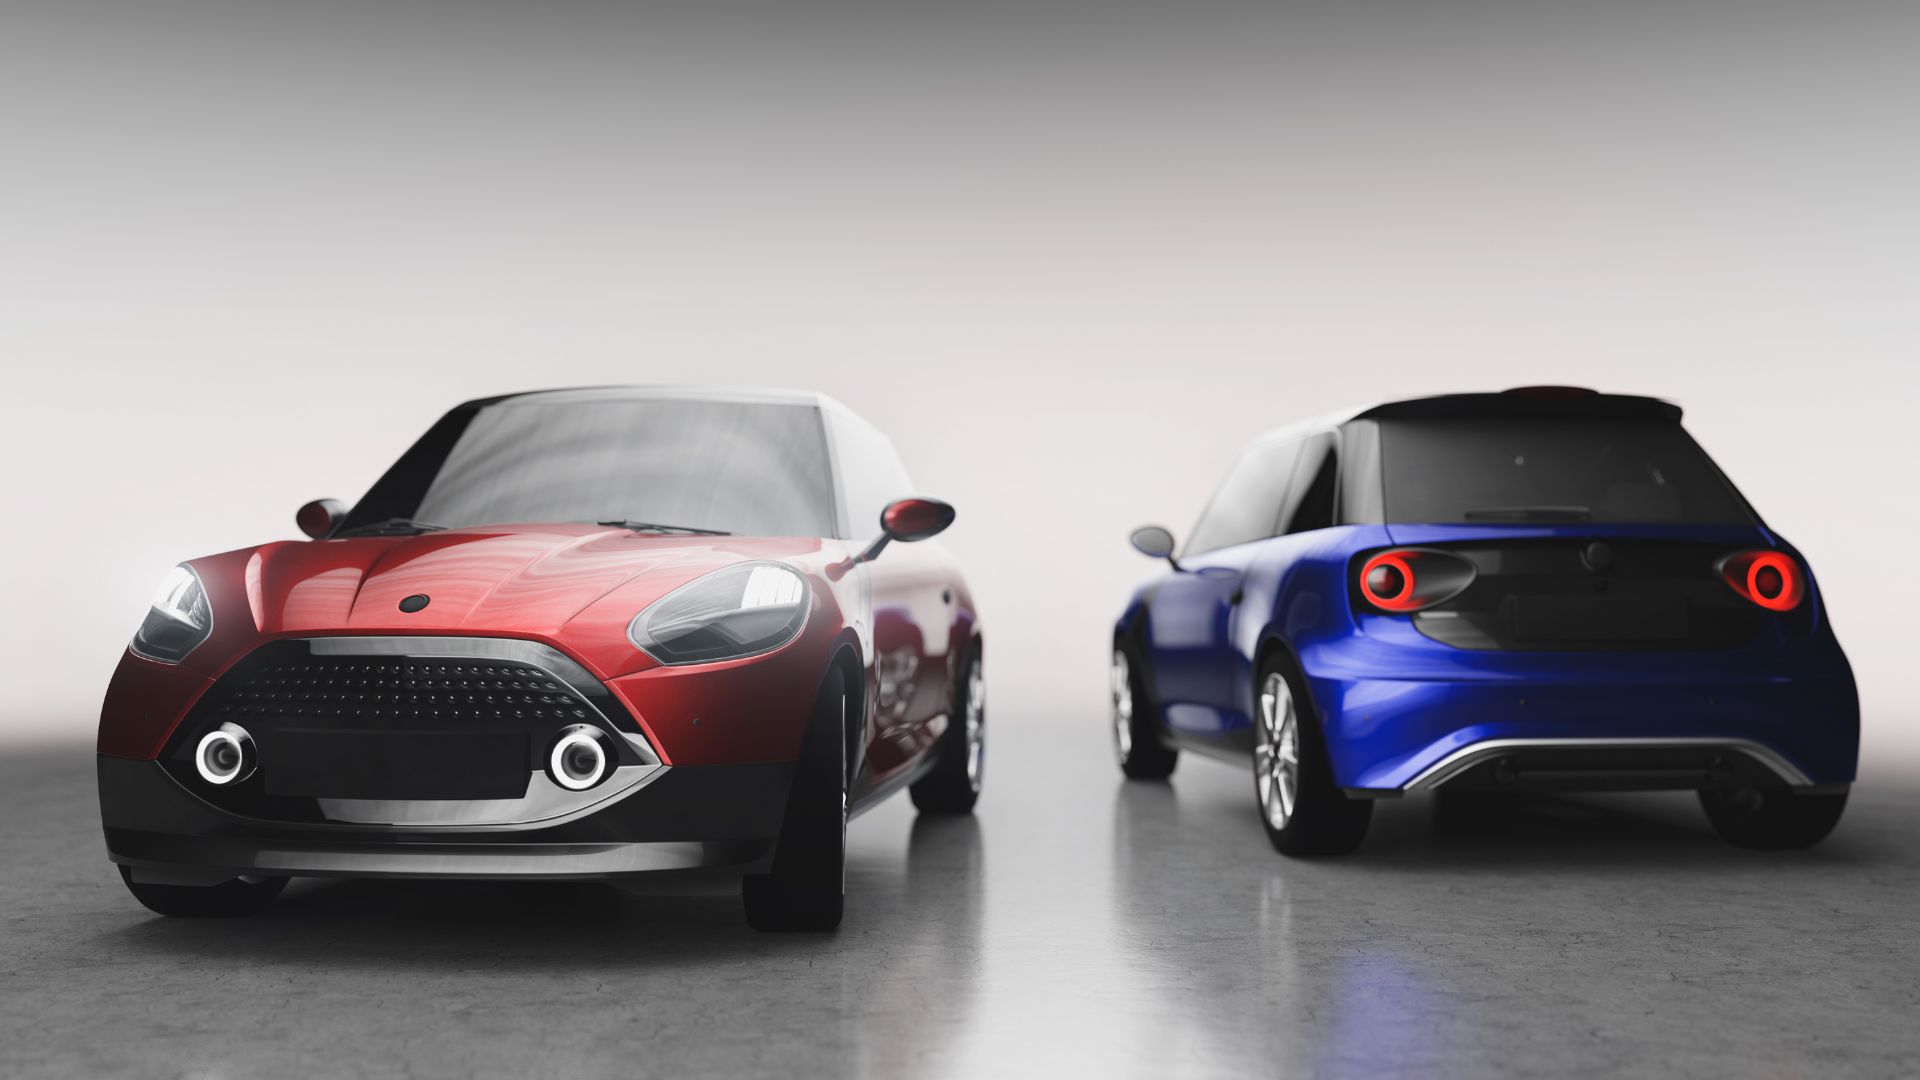 The Safest Small Cars in the UK